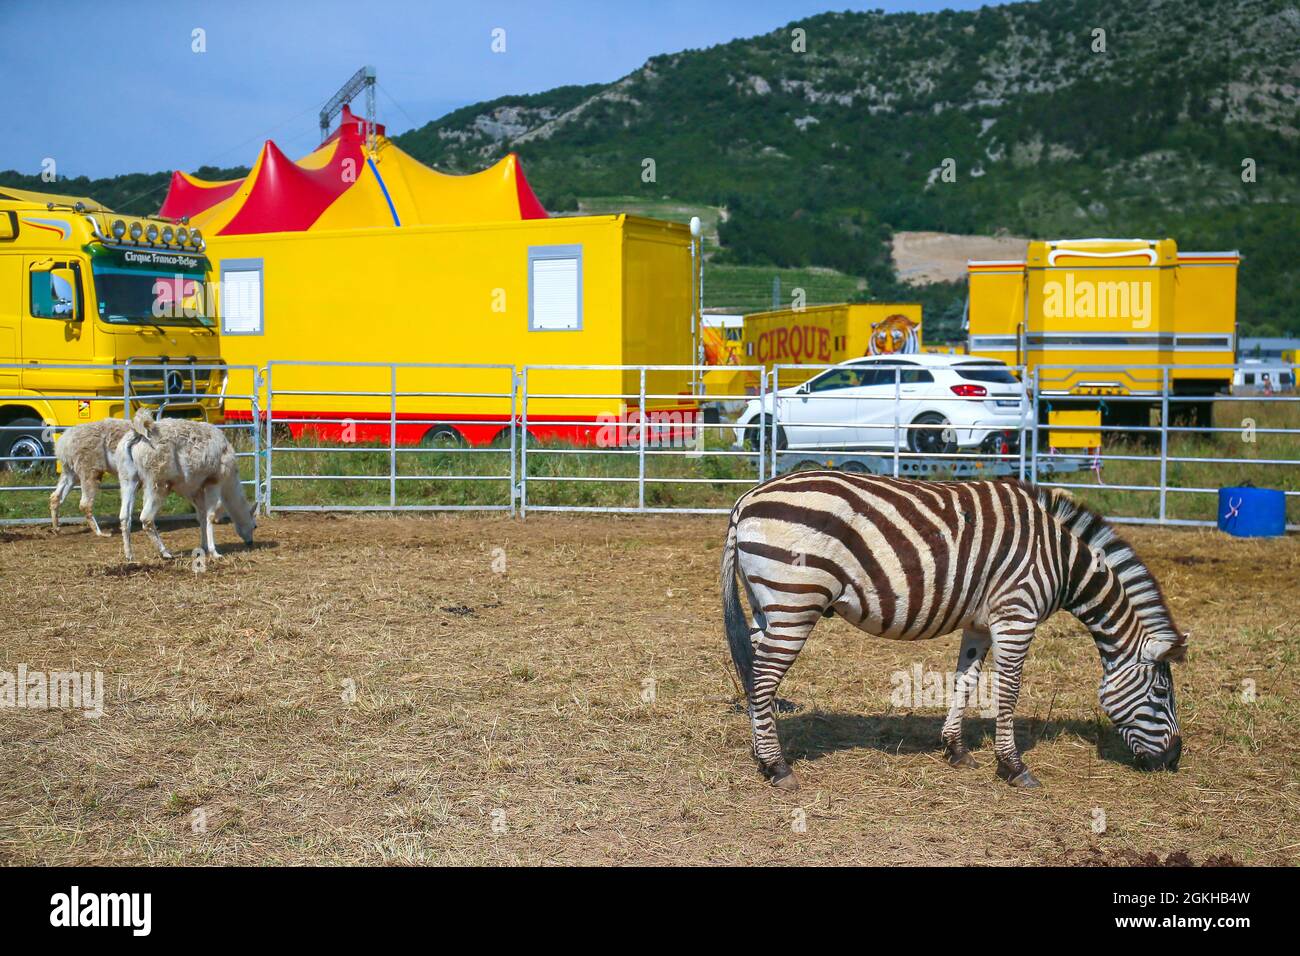 France, Soyons, 2021-06-27. An itinerant circus is set up on a vacant lot on the edge of a roundabout and a main road. Wild animals are parked on the Stock Photo